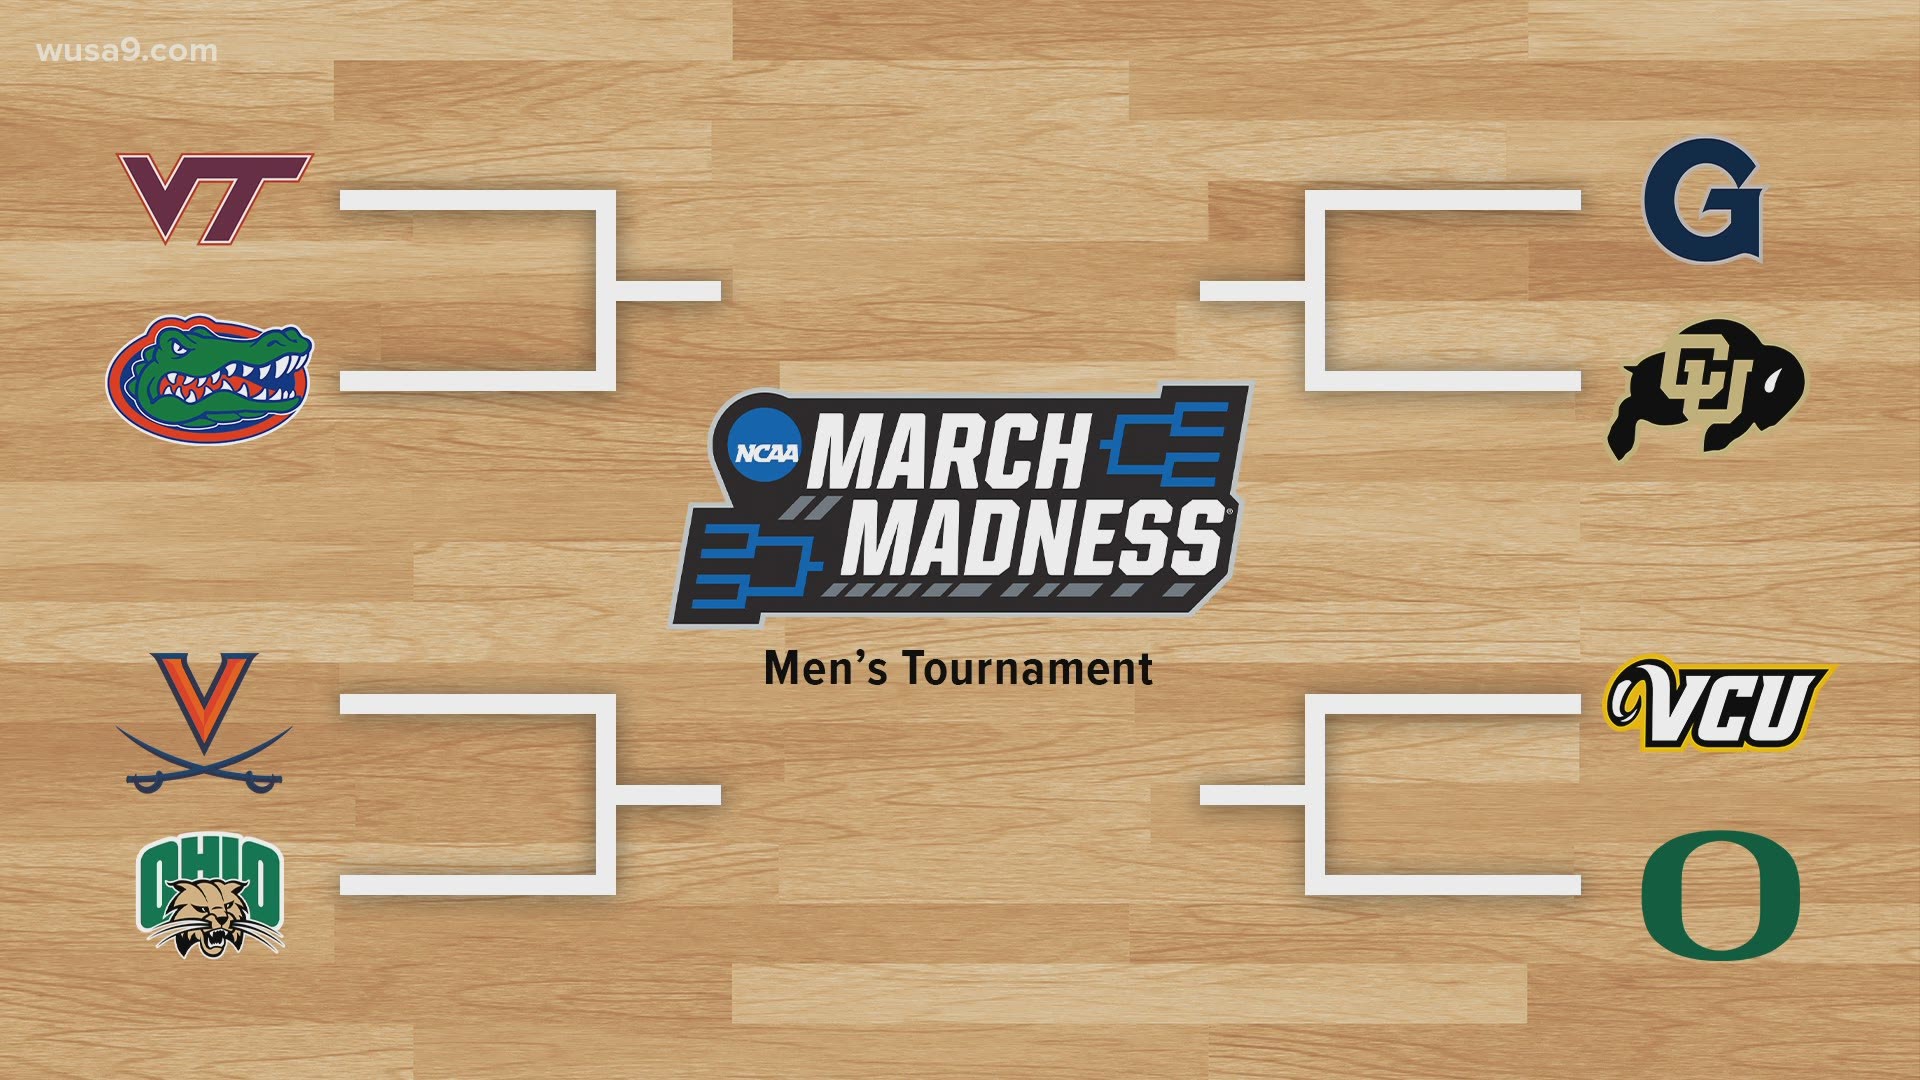 It's been a long week. Thankfully, March Madness tips off today